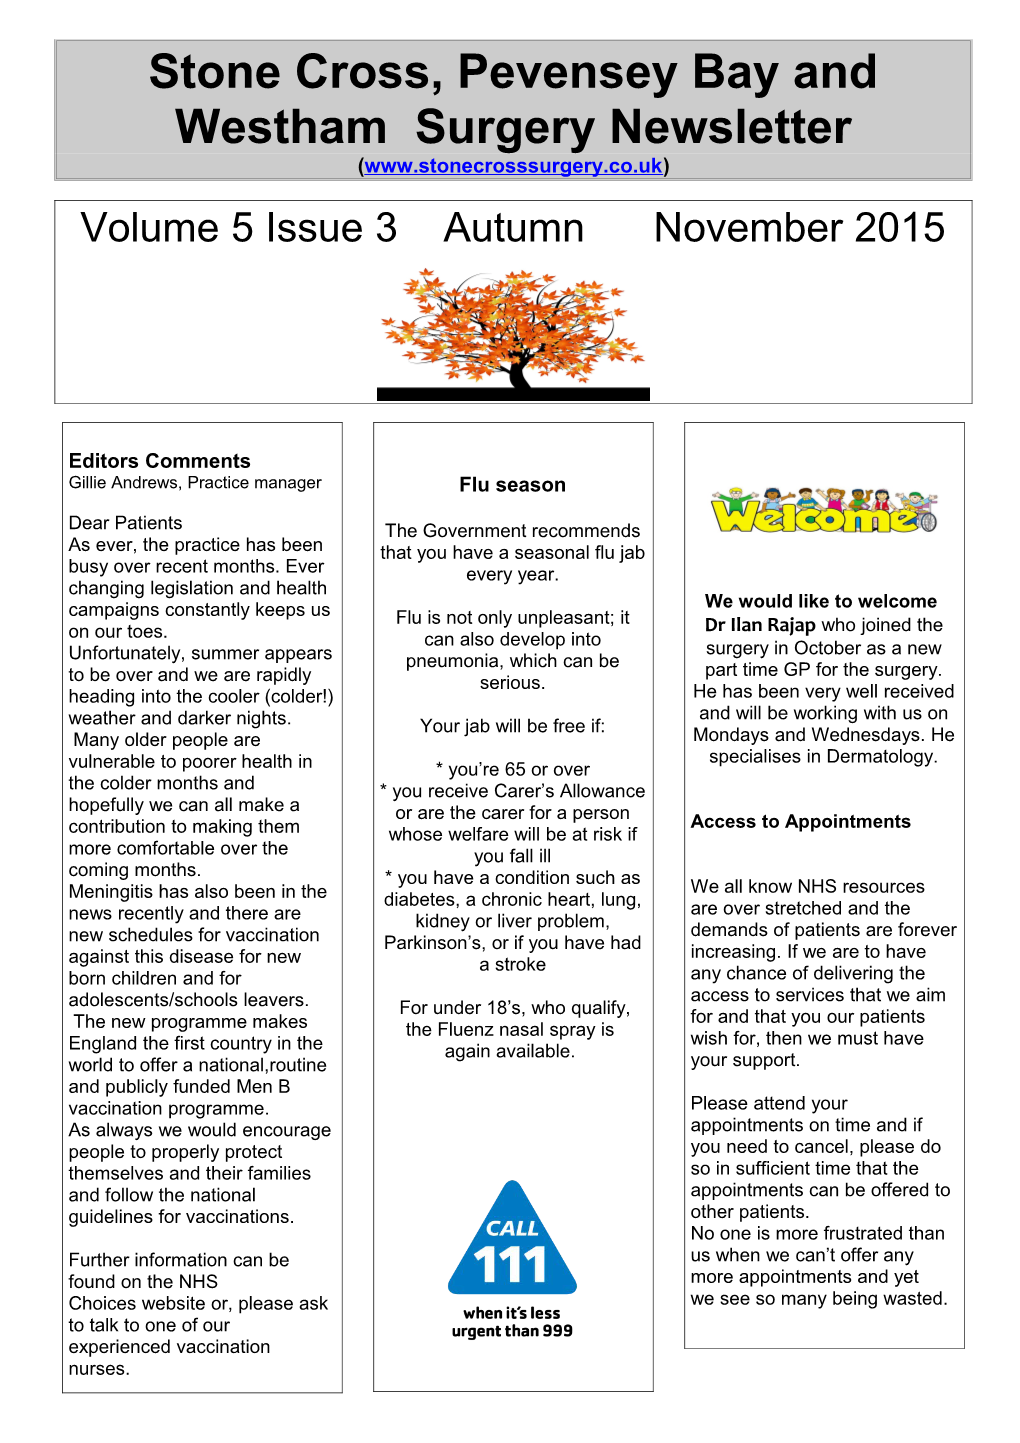 Stone Cross, Pevensey Bay and Westham Surgery Newsletter